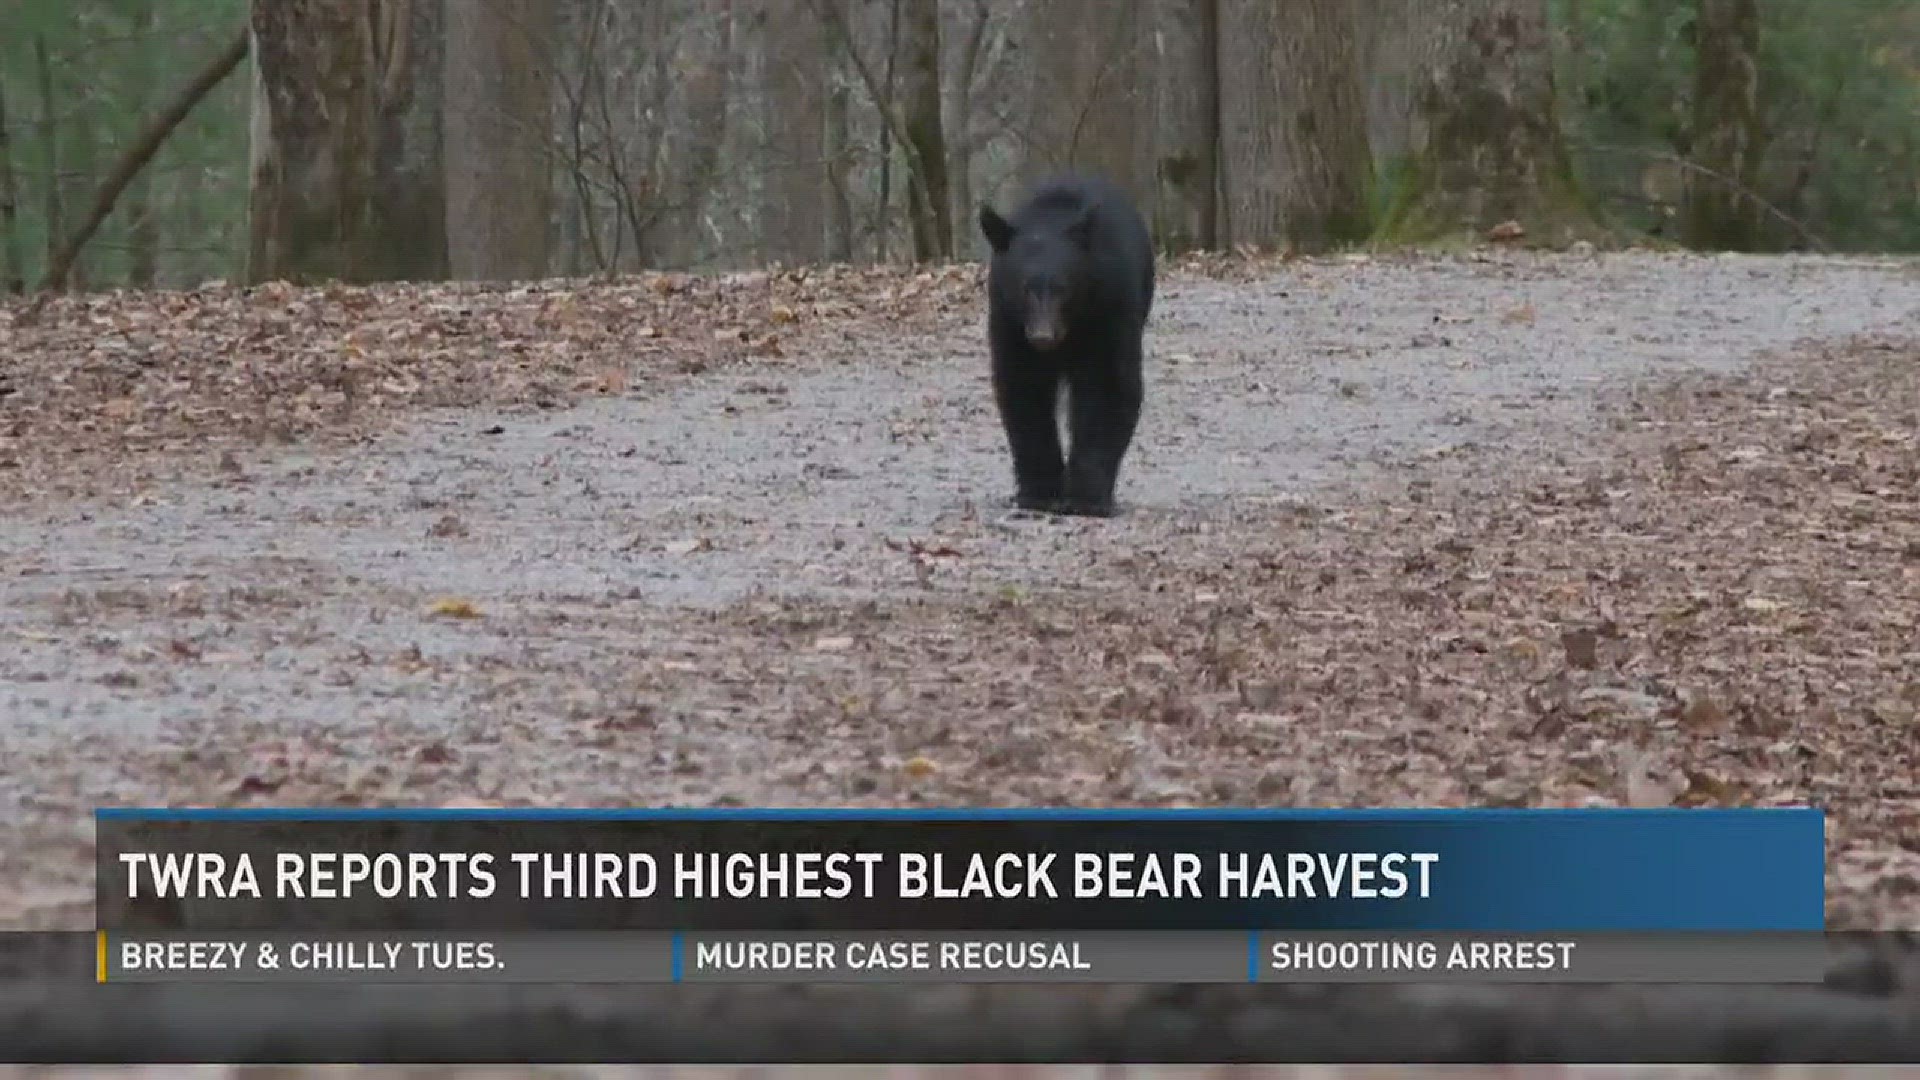 T-W-R-A is reporting the third highest black bear harvest on record. Bear season started in late September and wrapped up January 2.